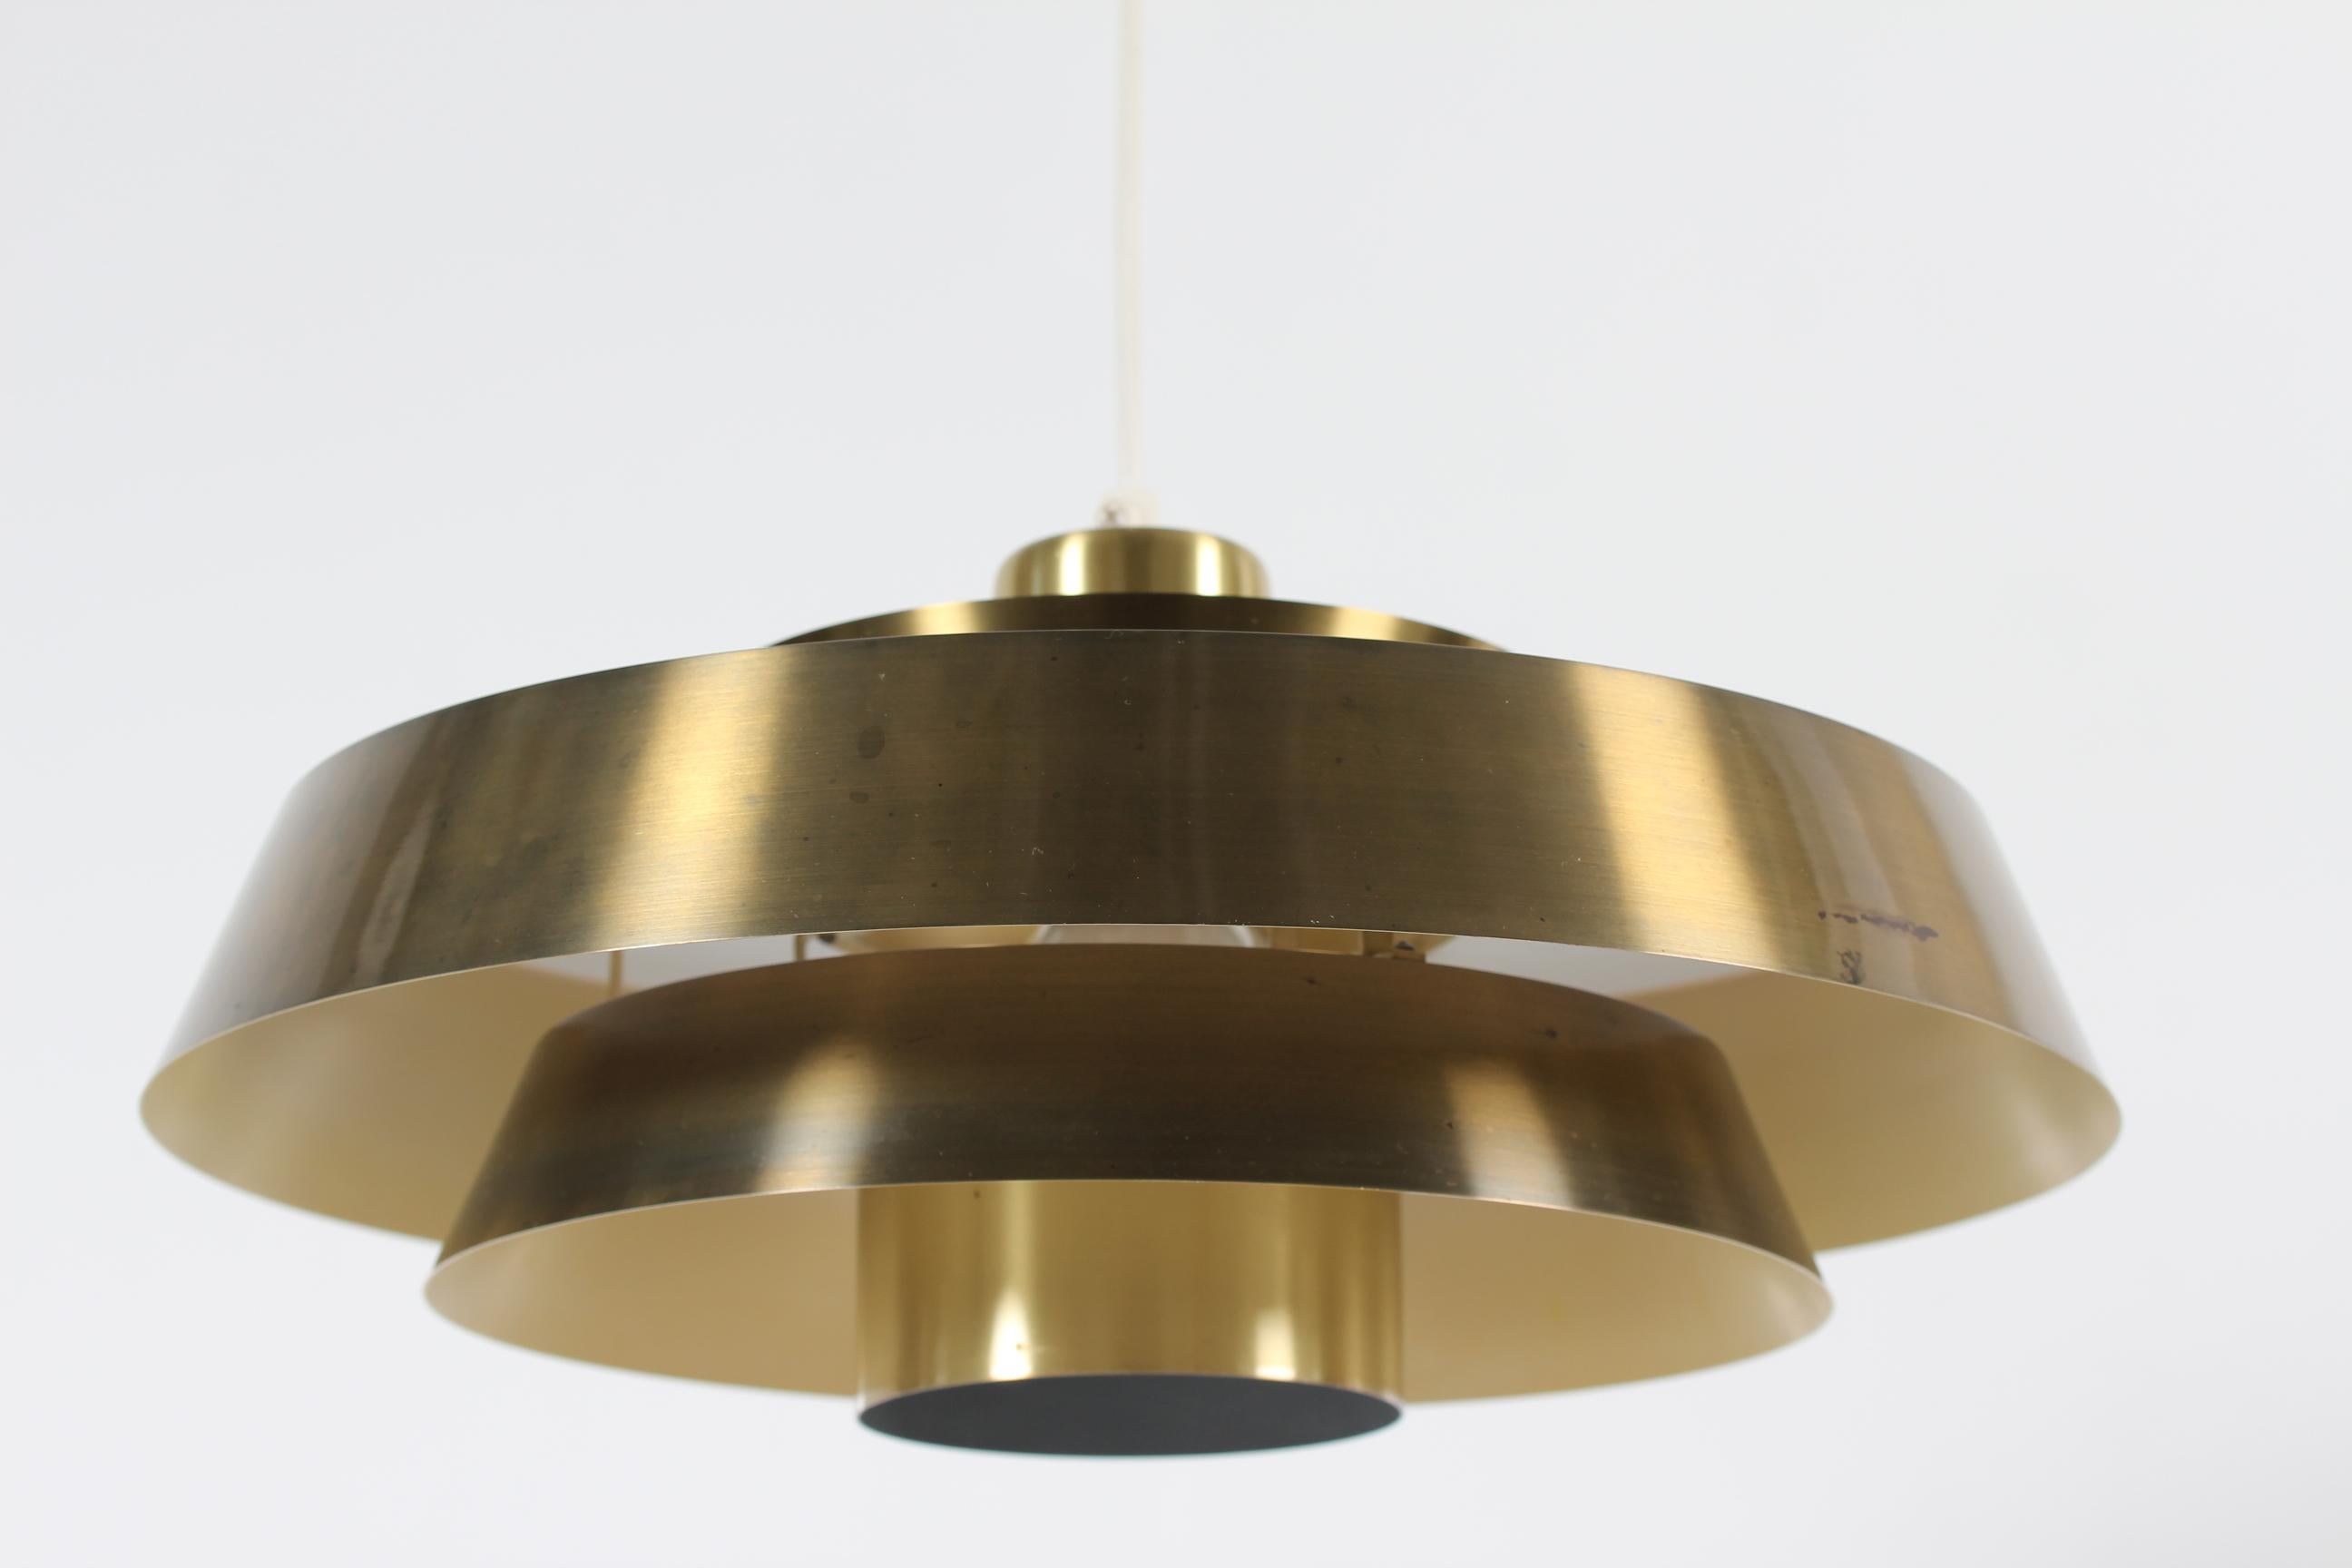 Original vintage Nova ceiling pendant designed by Danish designer Jo Hammerborg in the 1960´s.
It's made of brass, the inside is with white and light yellow lacquer.
The lamp is made by the Danish lamp manufacturer Fog & Mørup in Copenhagen in the